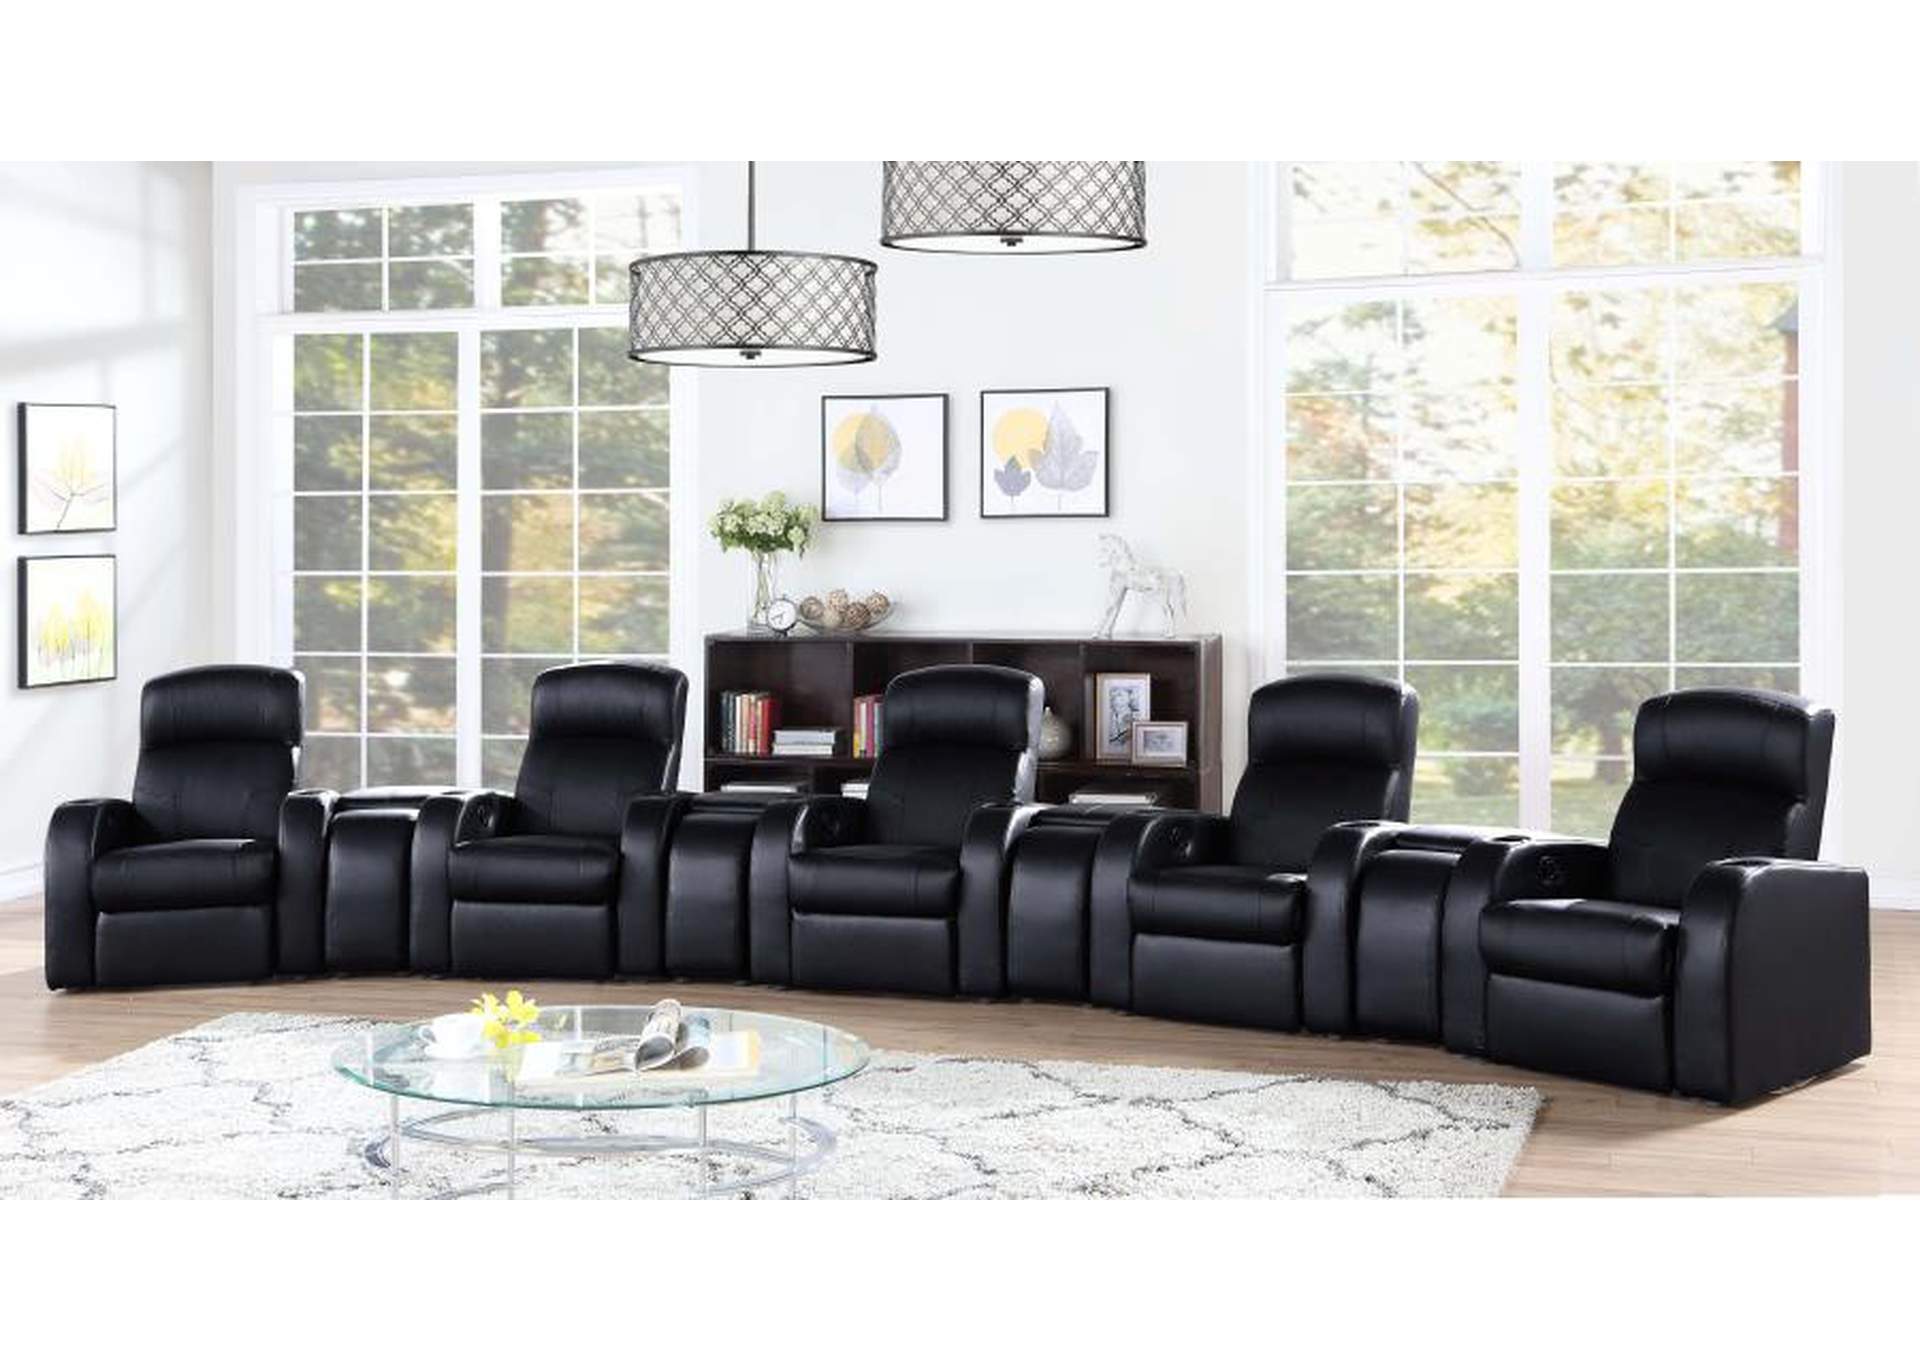 Cyrus Home Theater Upholstered Console Black,Coaster Furniture